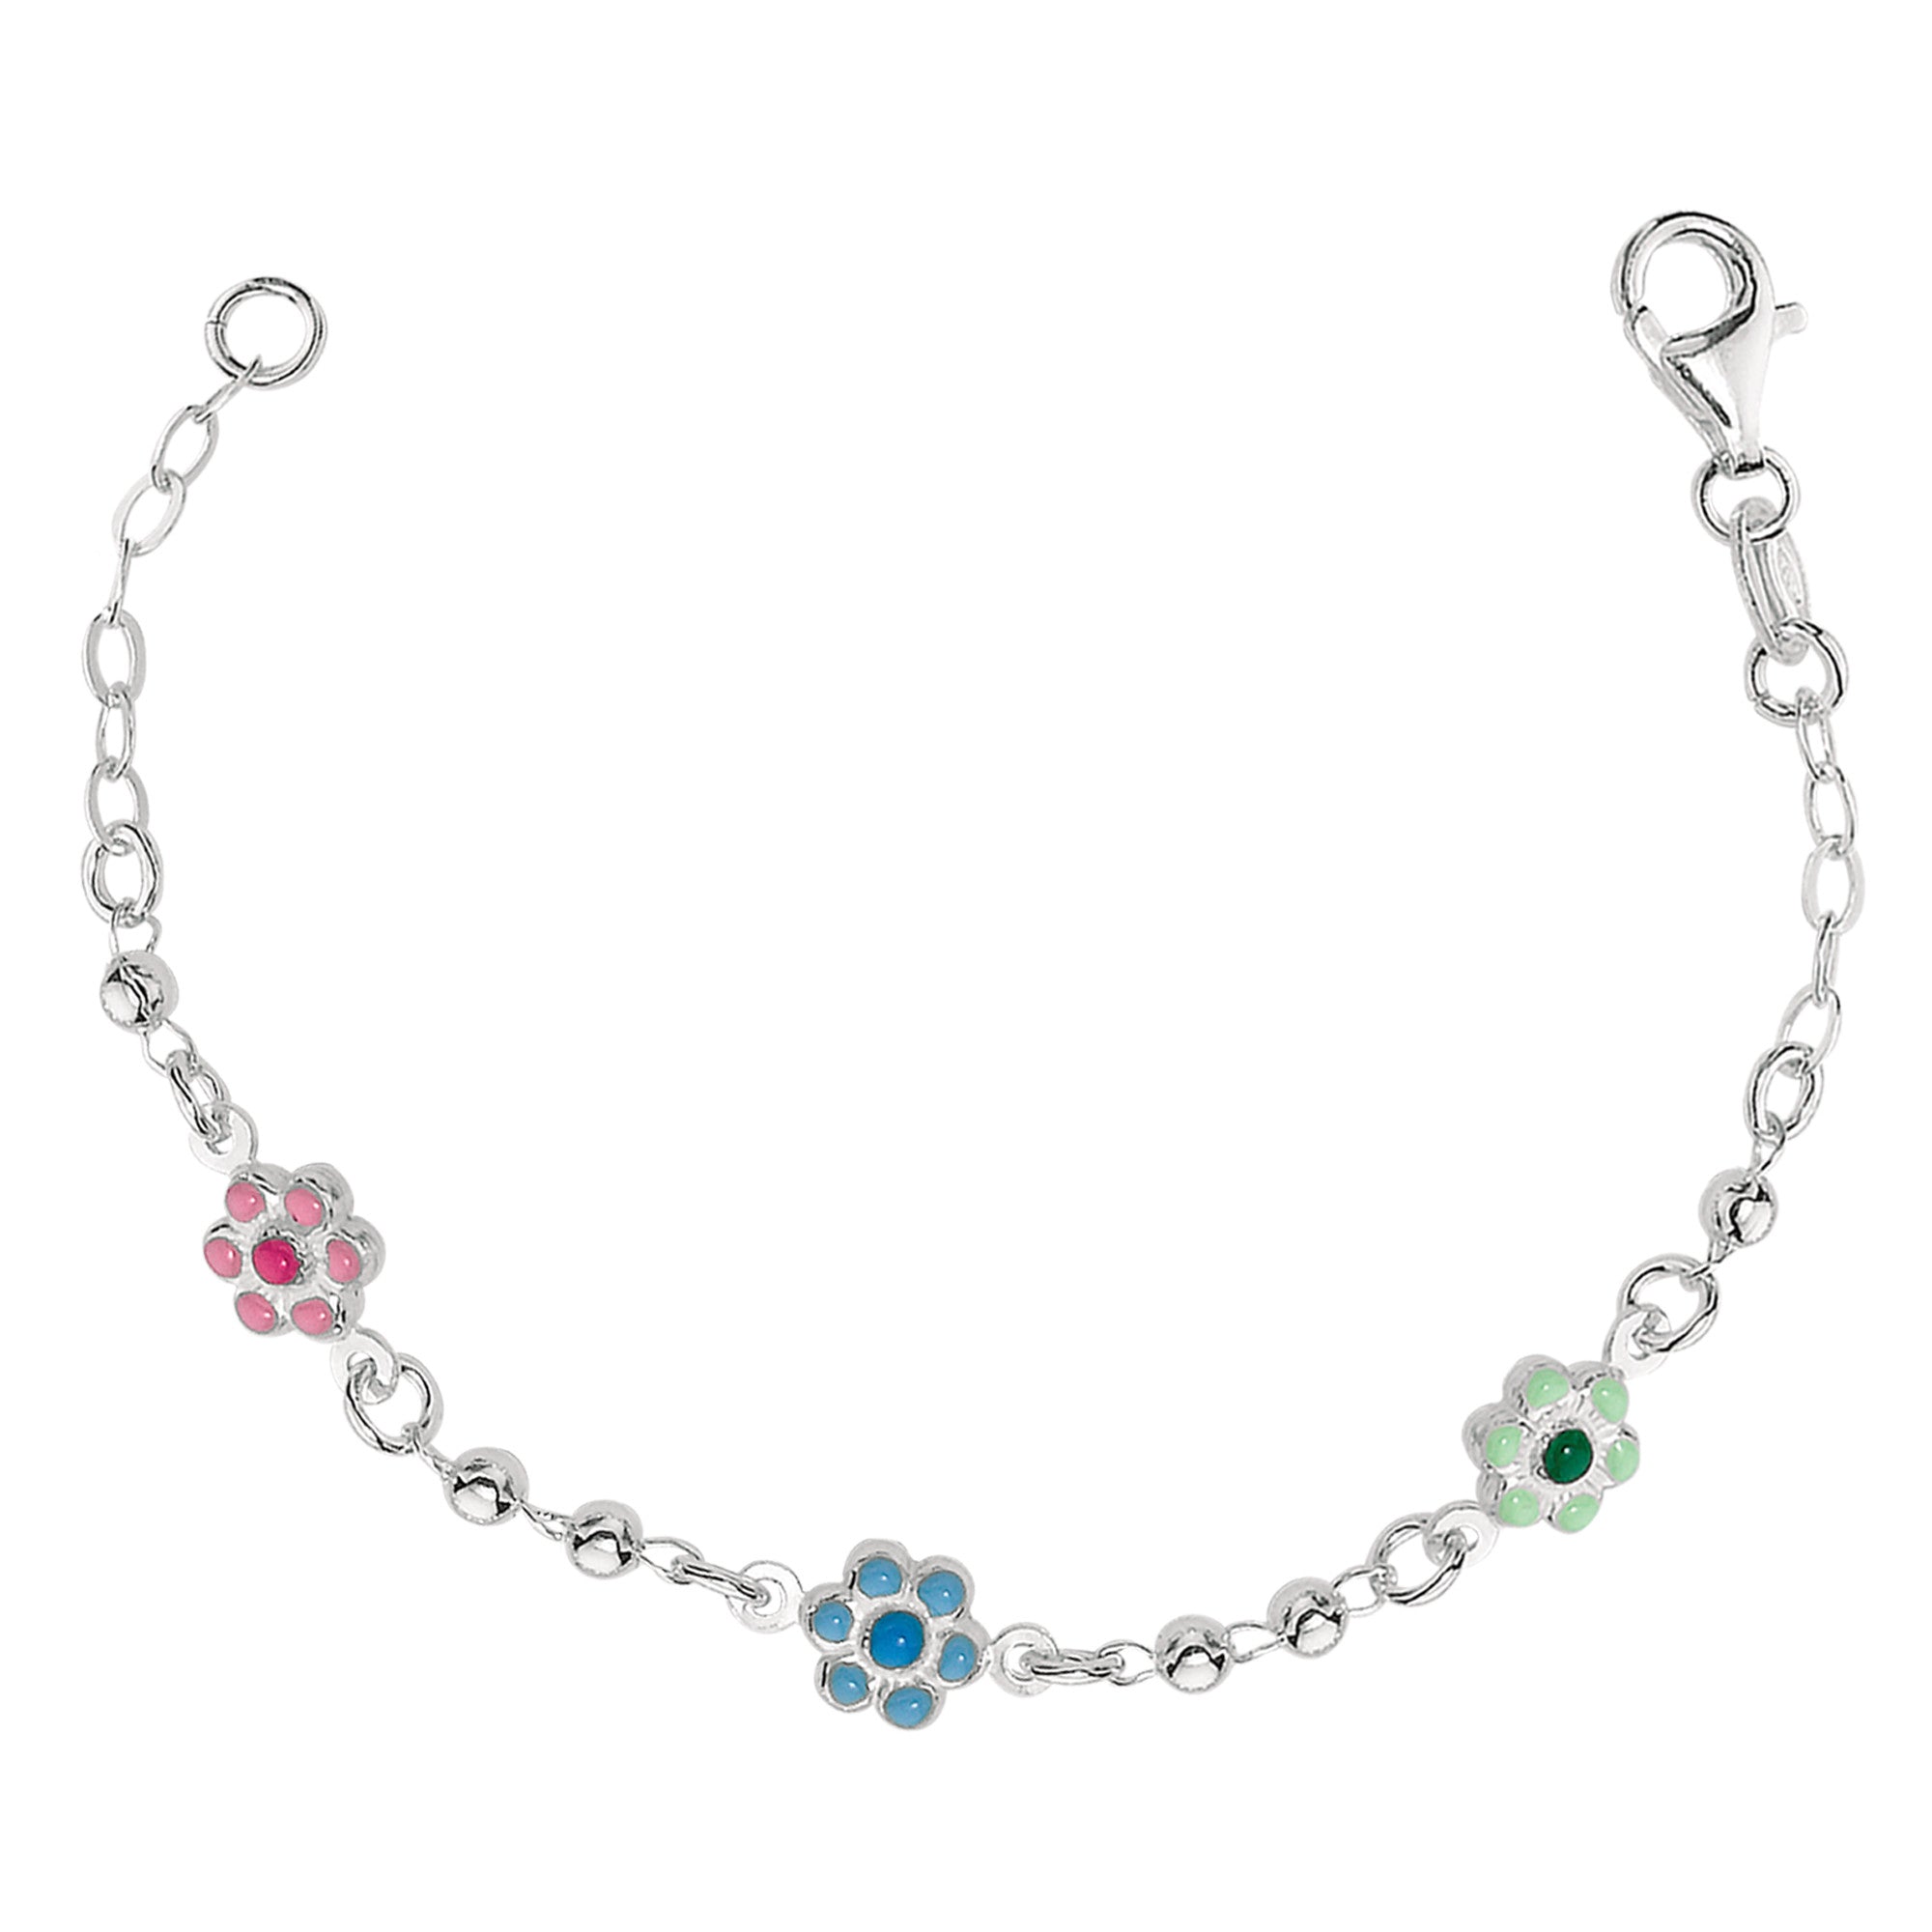 Baby Bracelet With Enameled Flower Charms In Sterling Silver - 6 Inches - JewelryAffairs
 - 1